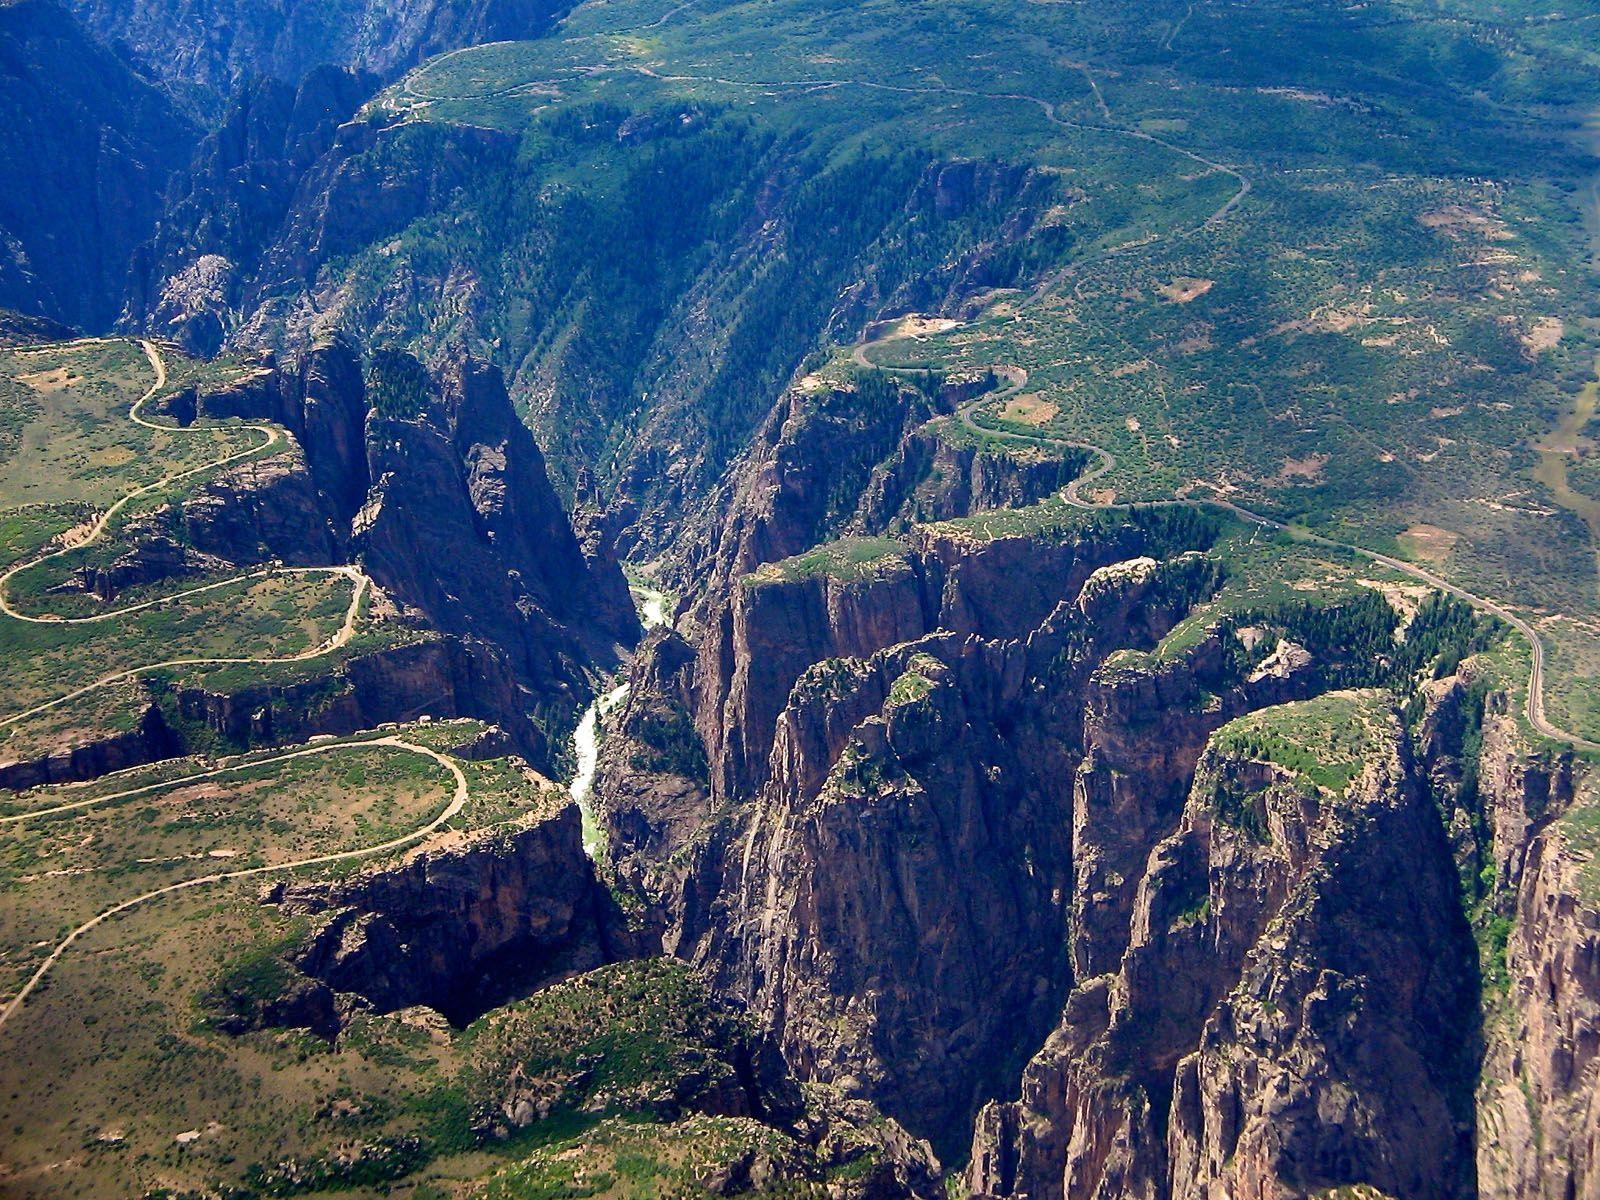 Black Canyon of the Gunnison National Park June 20